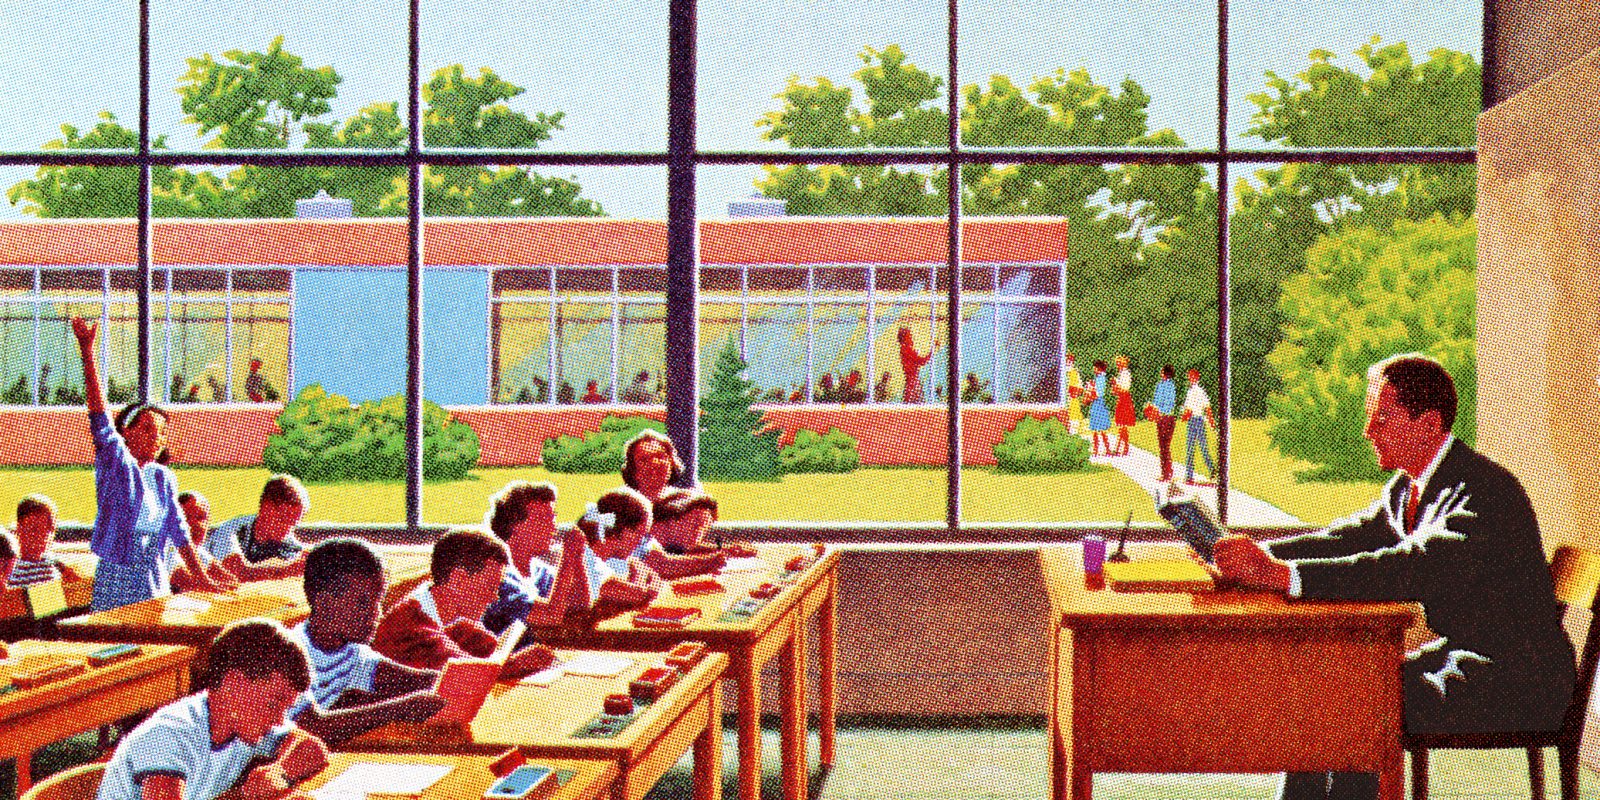 An illustration of a classroom. The teacher is sitting at the head of the room behind a desk and children in their own desks are raising their hands.